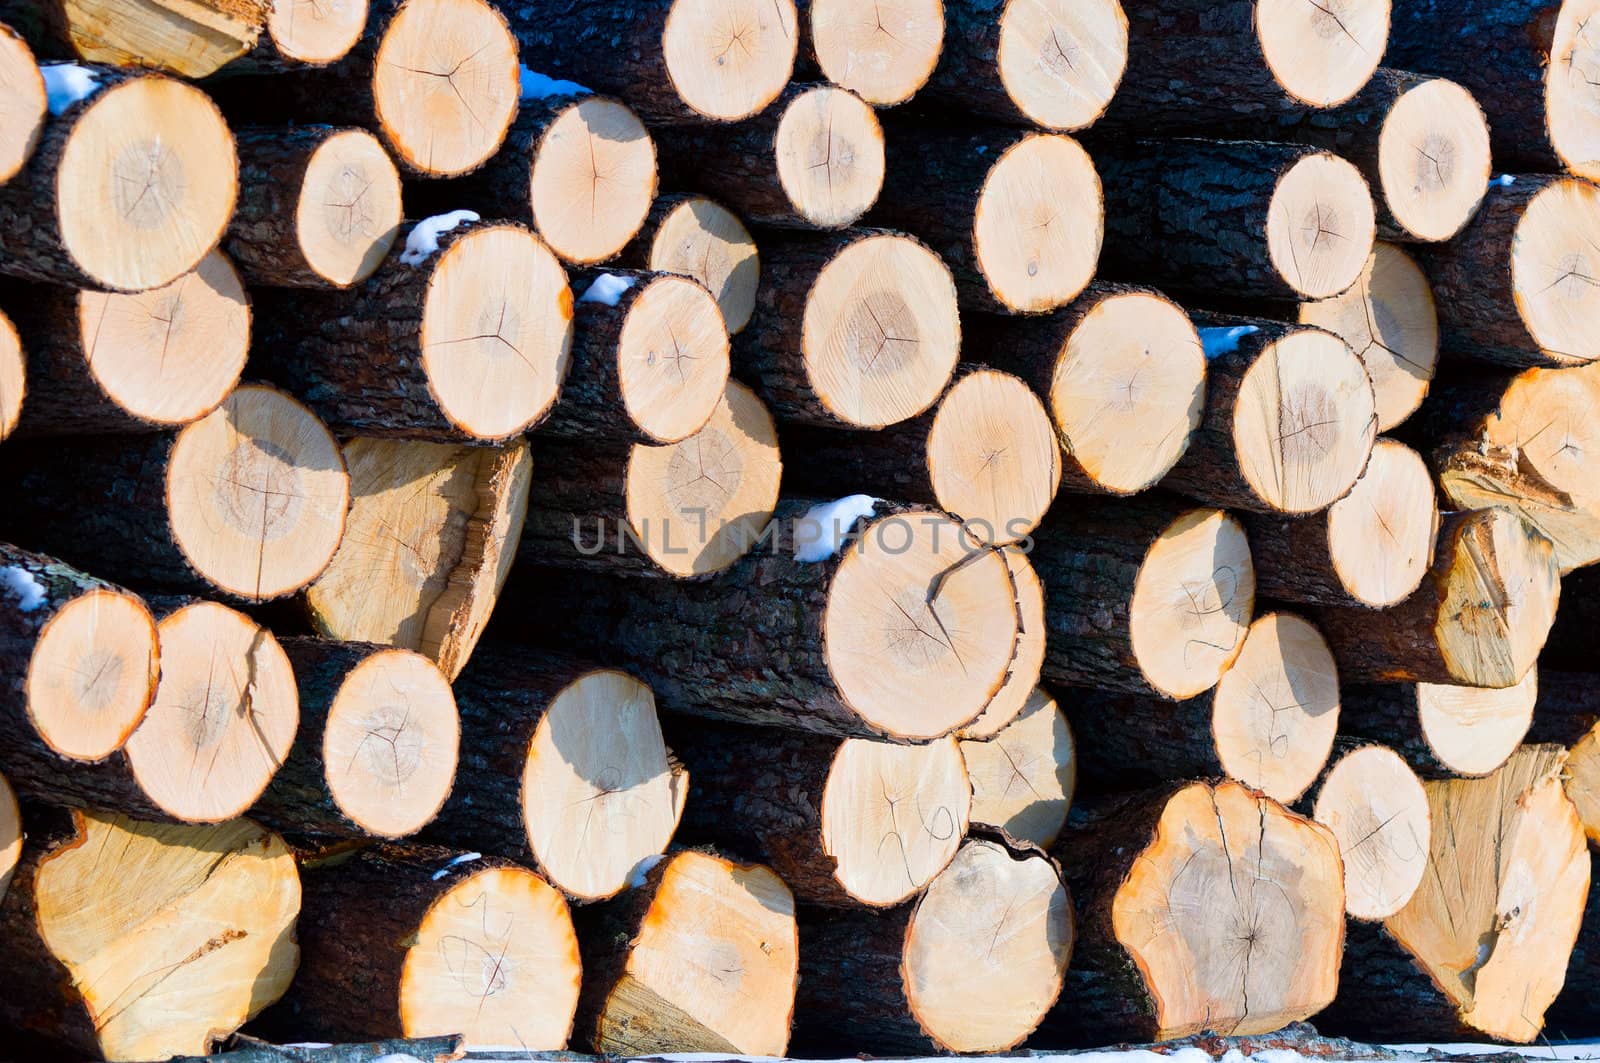 Large pile of cut wooden logs for renewable energy.